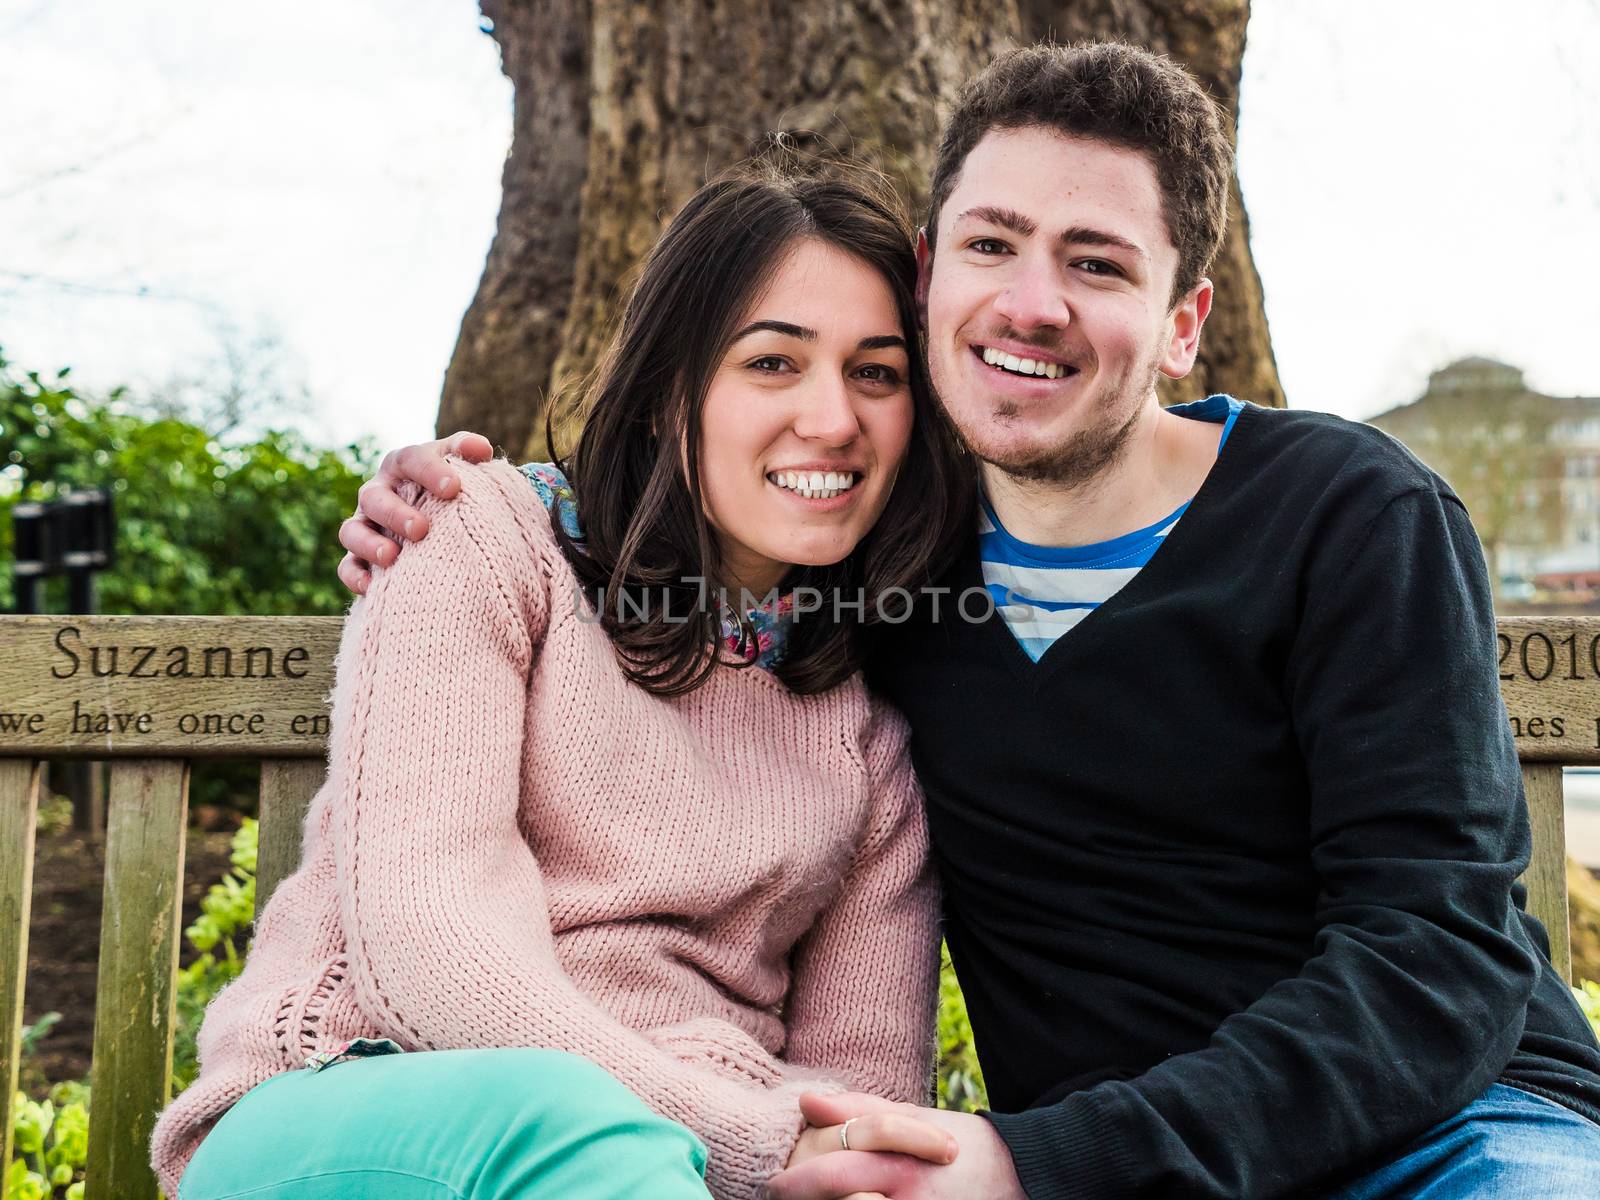 Romantic Young Couple Sitting On Park Bench Together and Smiling Looking at the Camera